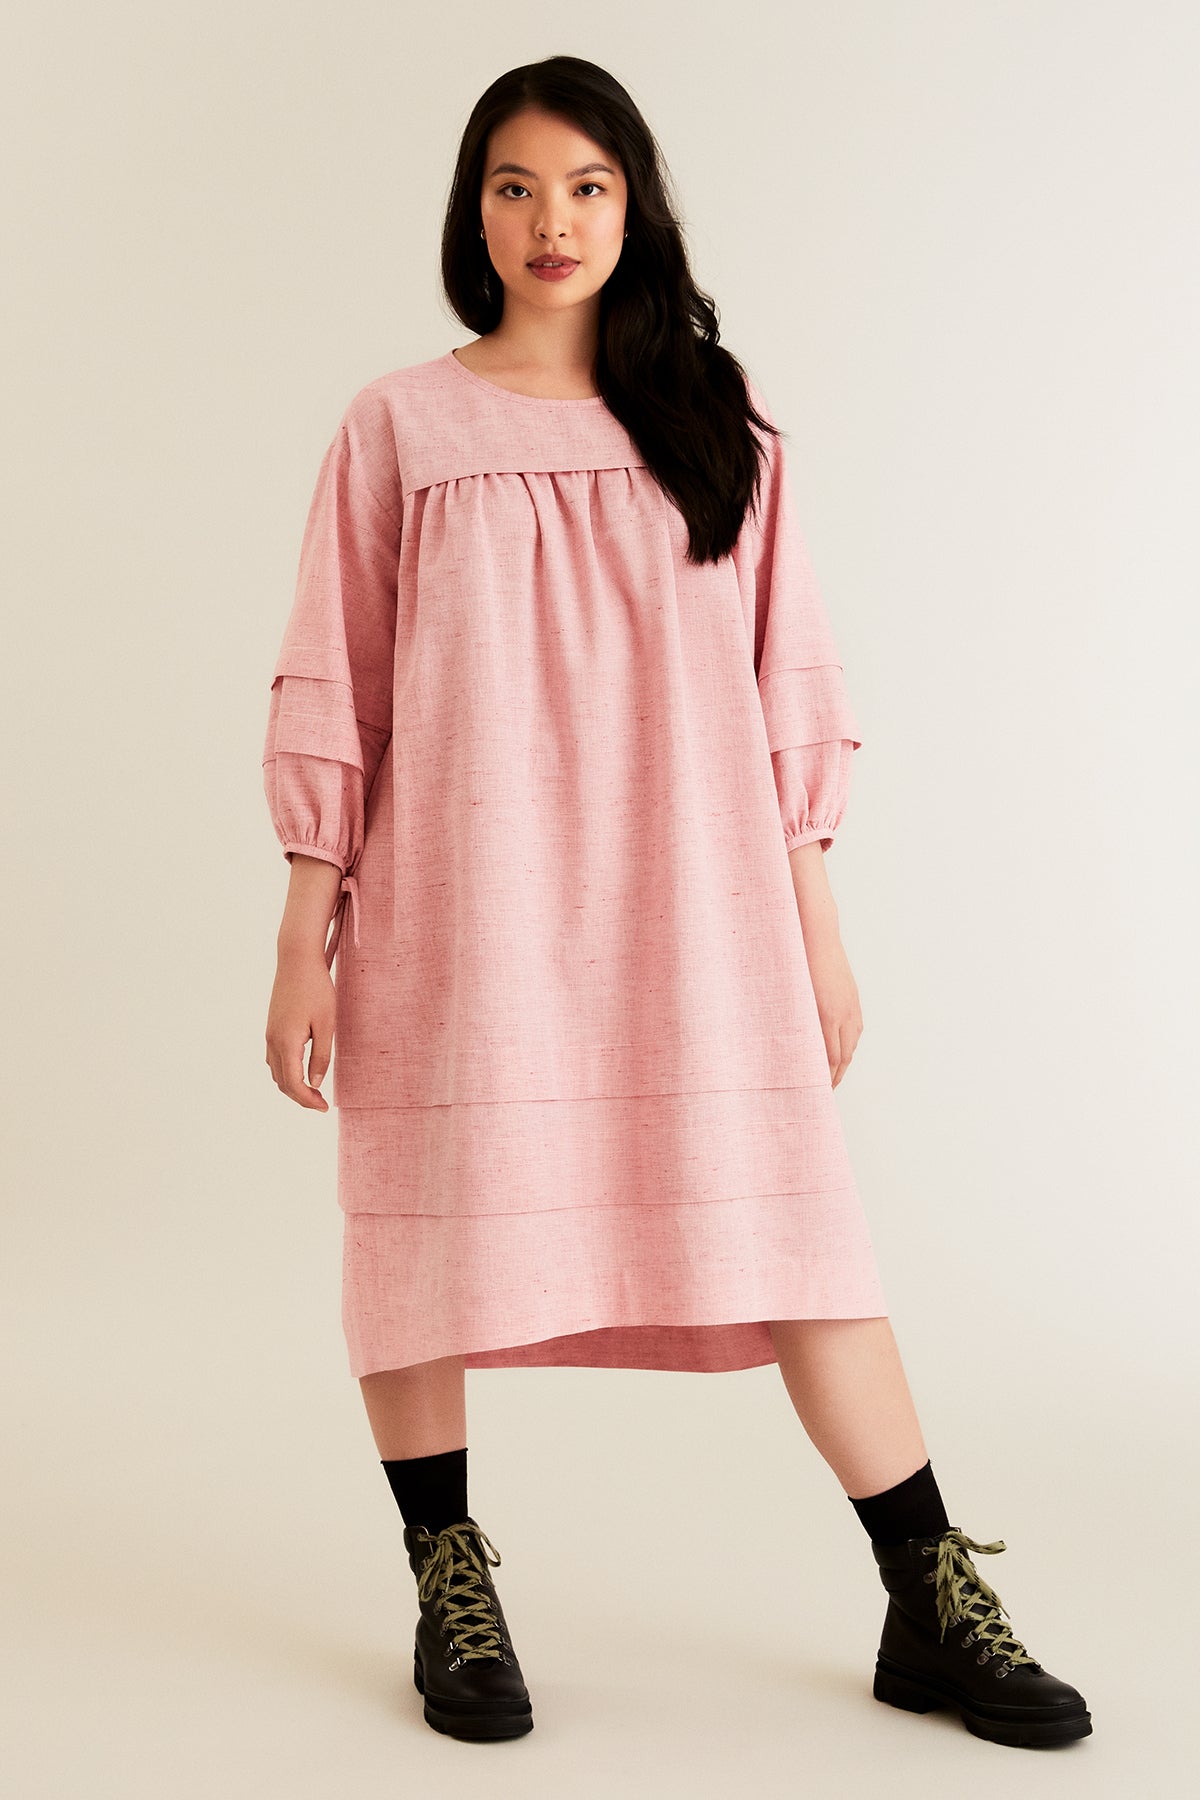 Women wearing the Syli Dress sewing pattern from Named on The Fold Line. A dress pattern made in cotton, linen, Tencel and rayon shirtings or dress-weight fabrics, featuring a loose fit, gathered bodice, shallow tuck across the chest, slightly dipping bac